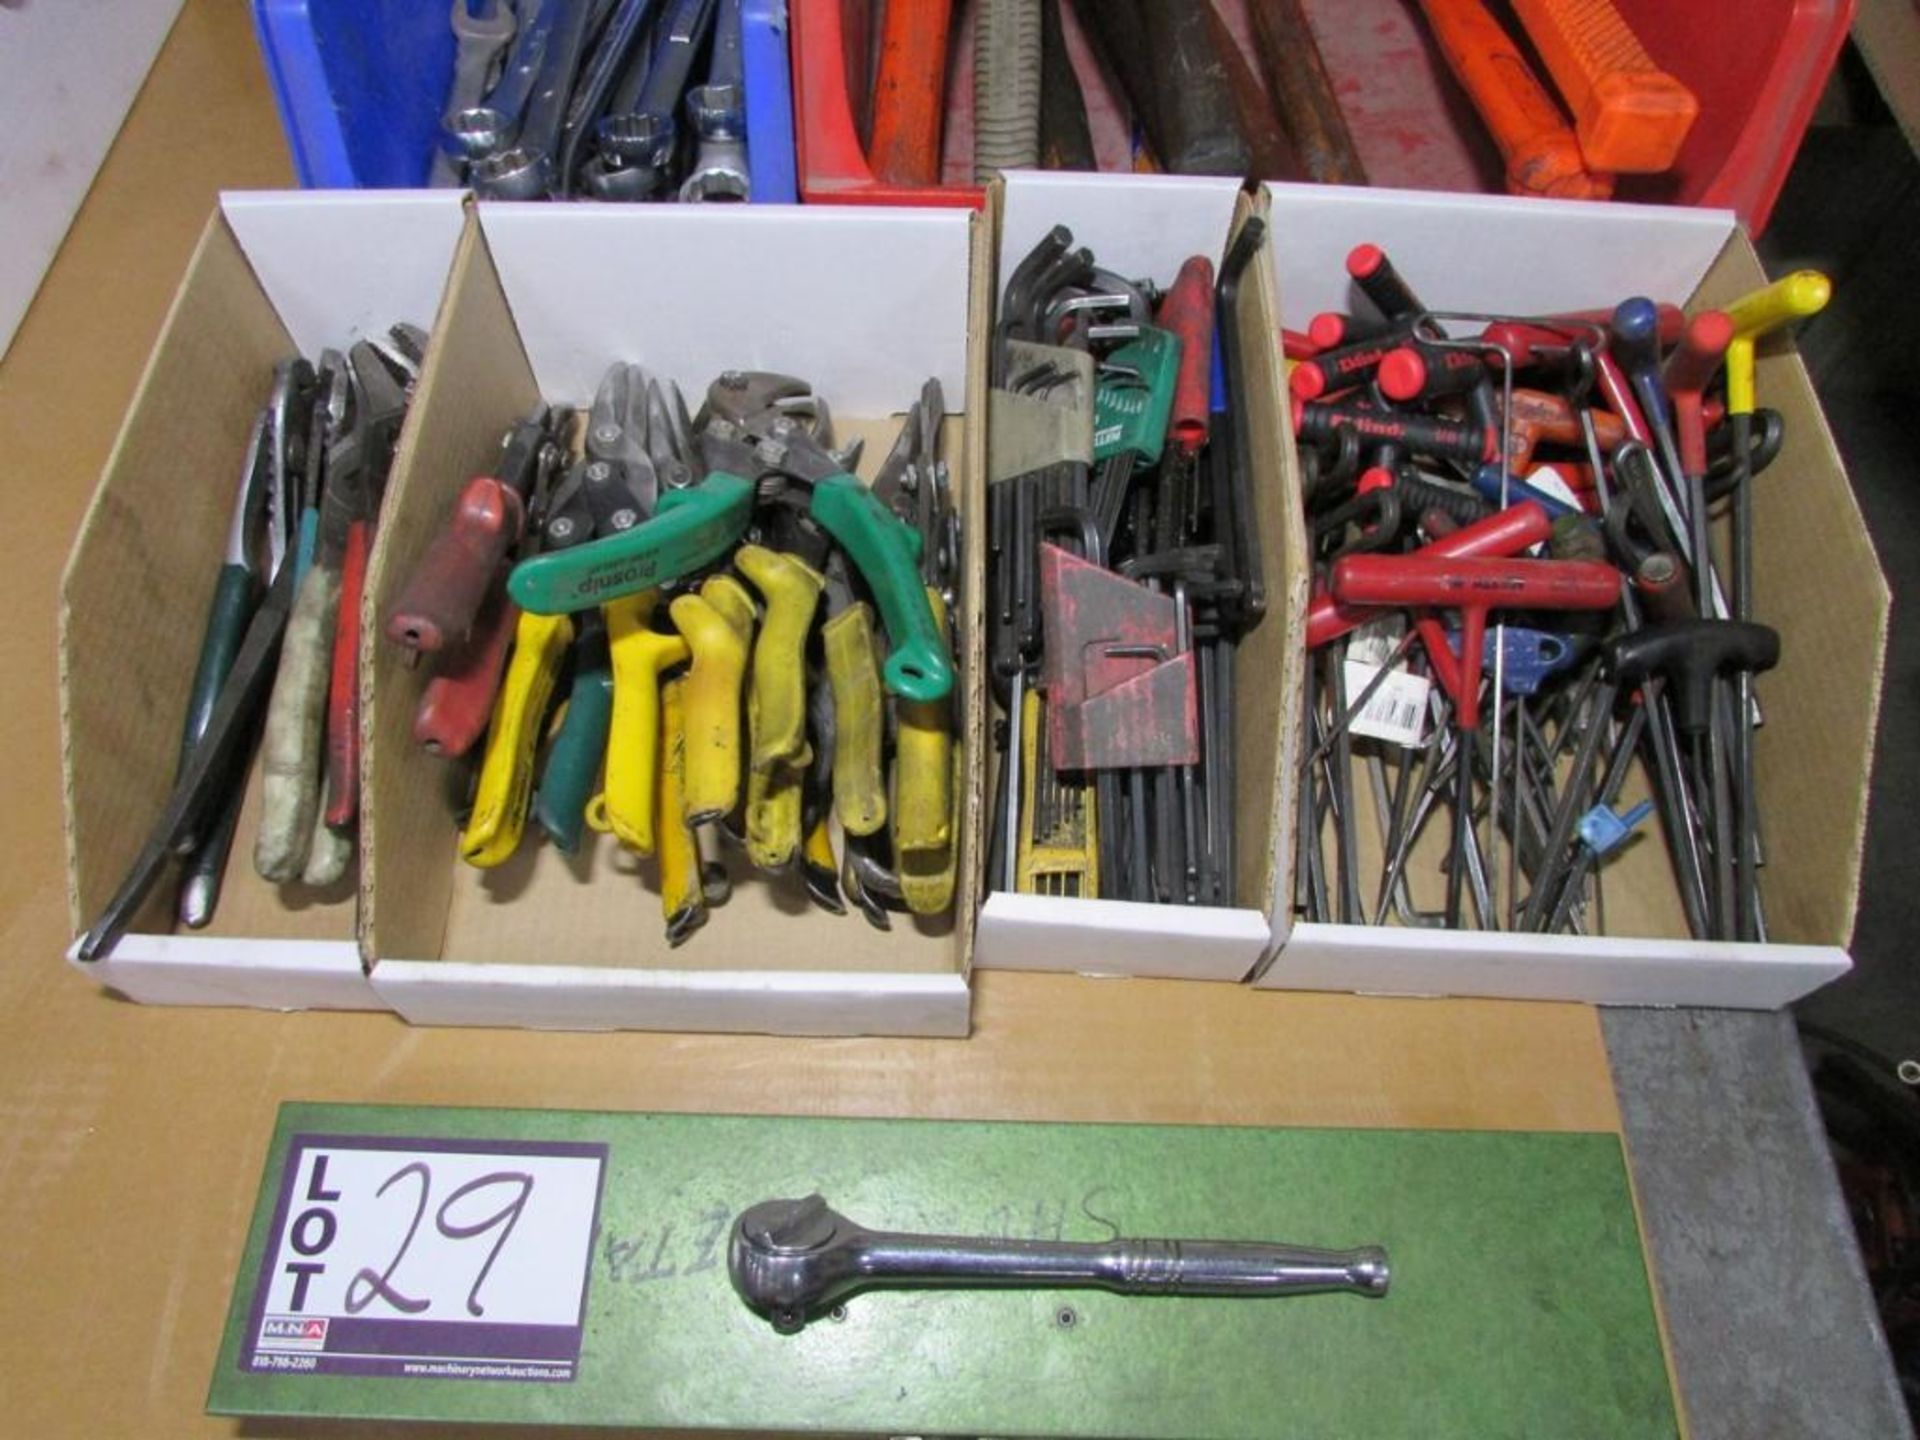 Assorted Hand Tools: Wrenches, Hammers, Pliers, Snips, Allen Wrenches, Ratchet, and Socket Set - Image 3 of 4